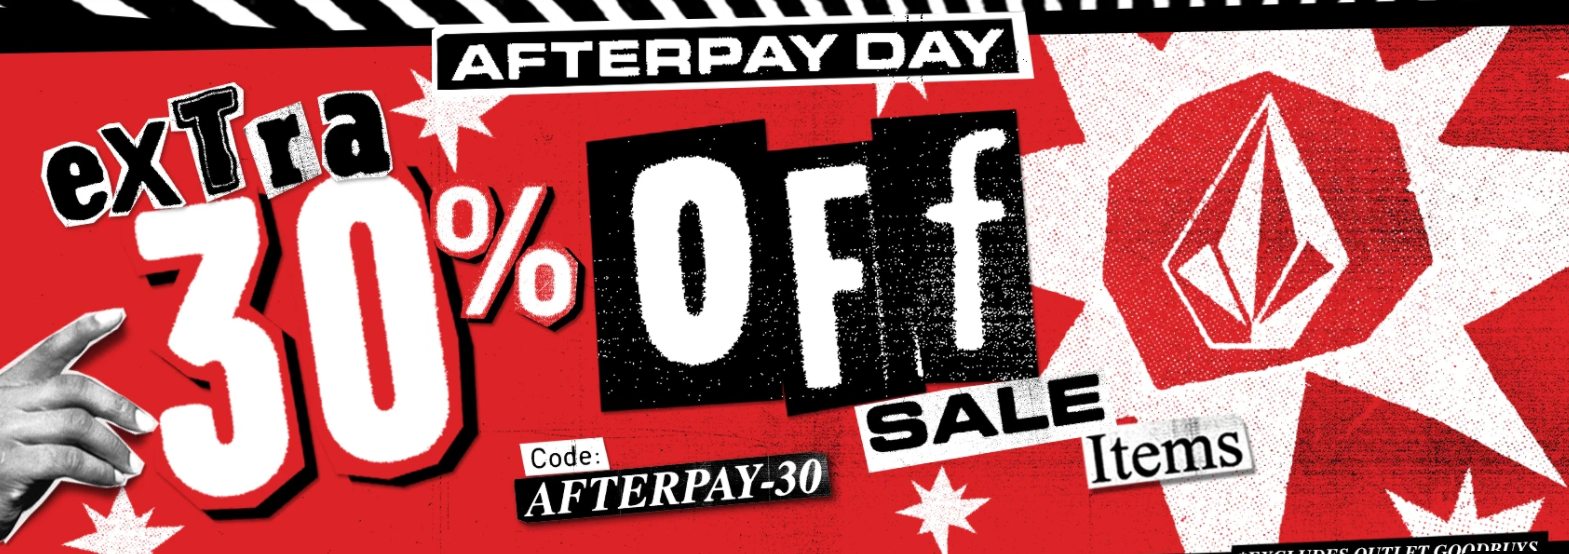 Extra 30% OFF on sale items